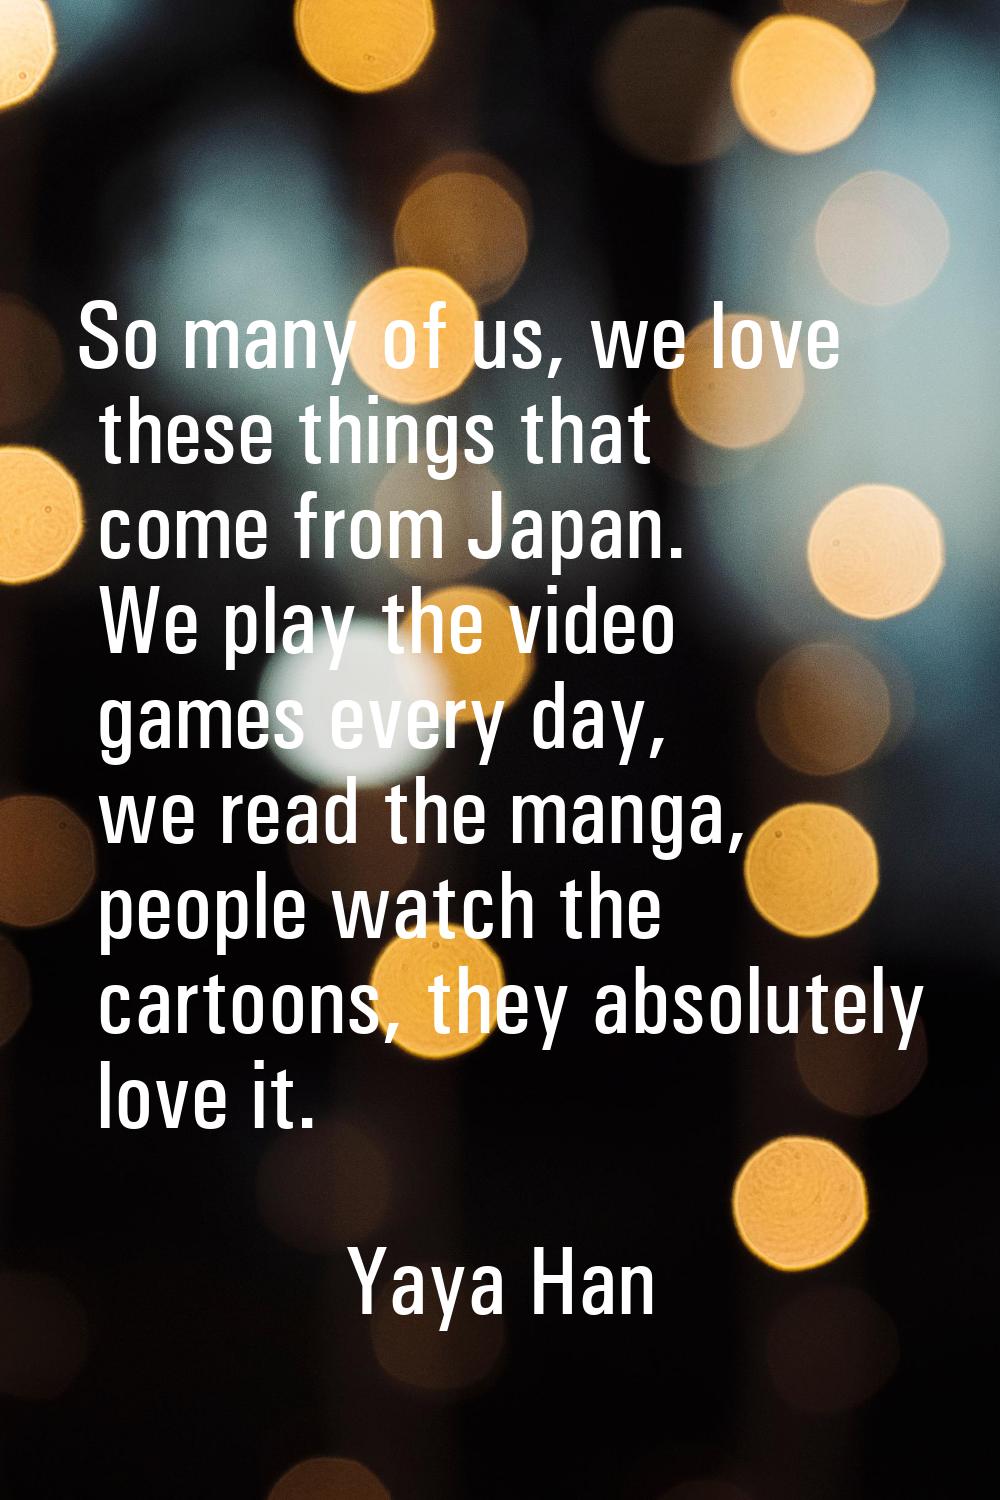 So many of us, we love these things that come from Japan. We play the video games every day, we rea